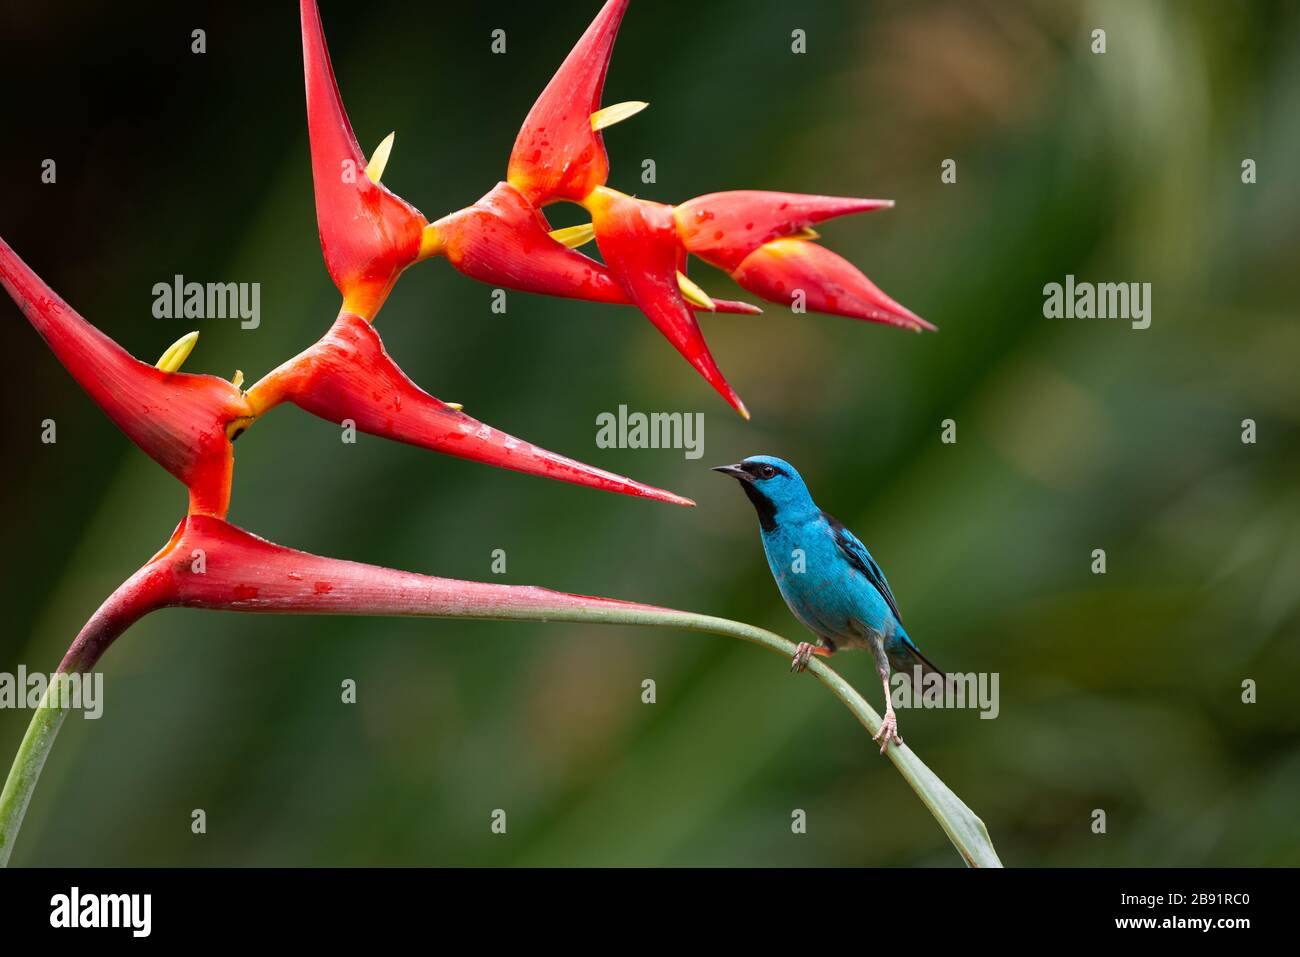 A male Blue Dacnis (Dacnis cayana) visiting a Heliconia flower in the Atlantic Rainforest Stock Photo